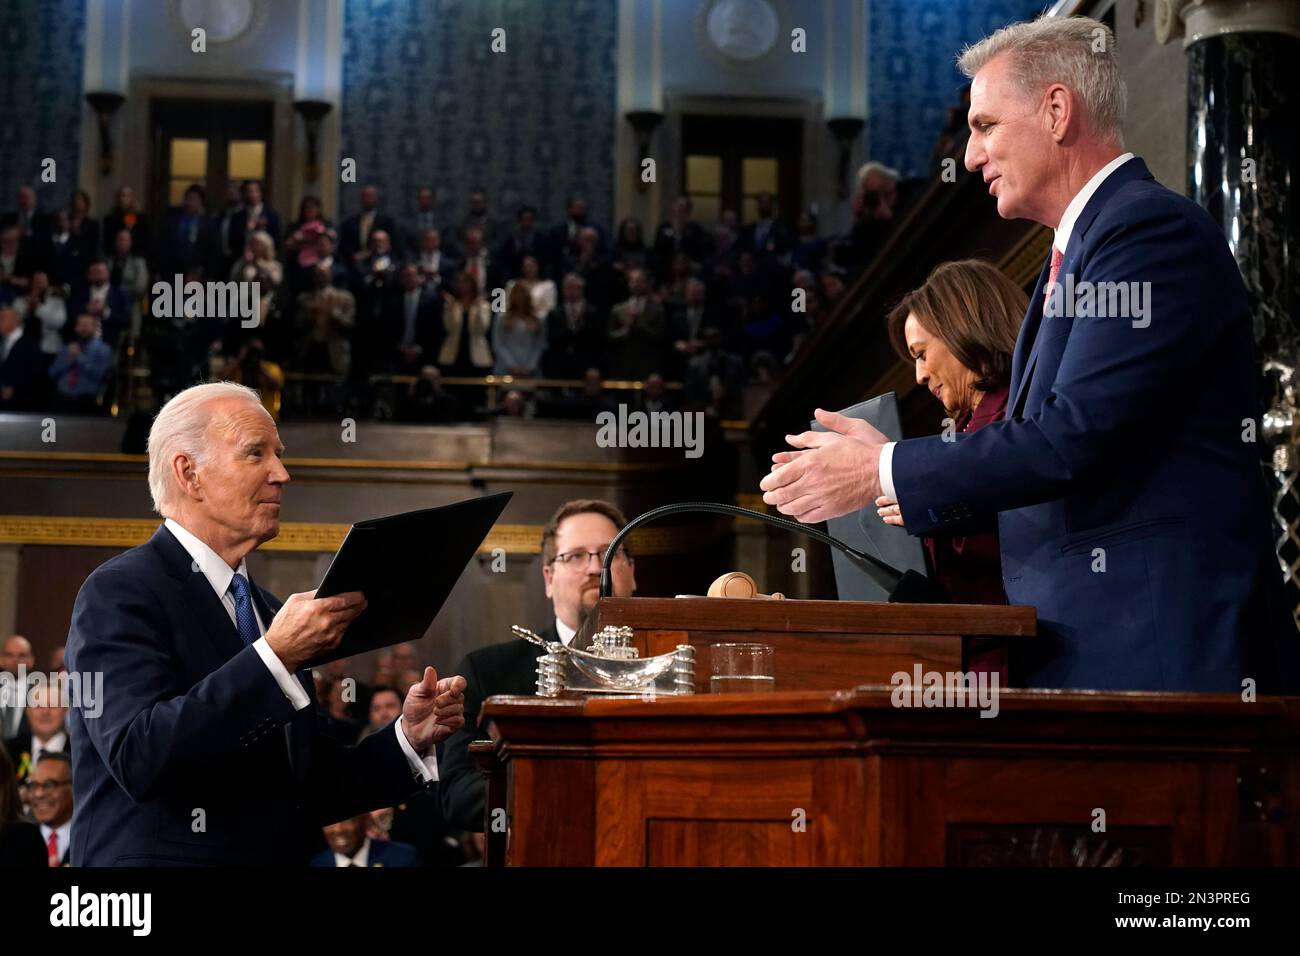 Washington. 7th Feb, 2023. President Joe Biden hands a copy of his speech to House Speaker Kevin McCarthy of Calif., at the State of the Union address to a joint session of Congress at the Capitol, Tuesday, Feb. 7, 2023, in Washington. Credit: Jacqueline Martin/Pool via CNP/dpa/Alamy Live News Stock Photo